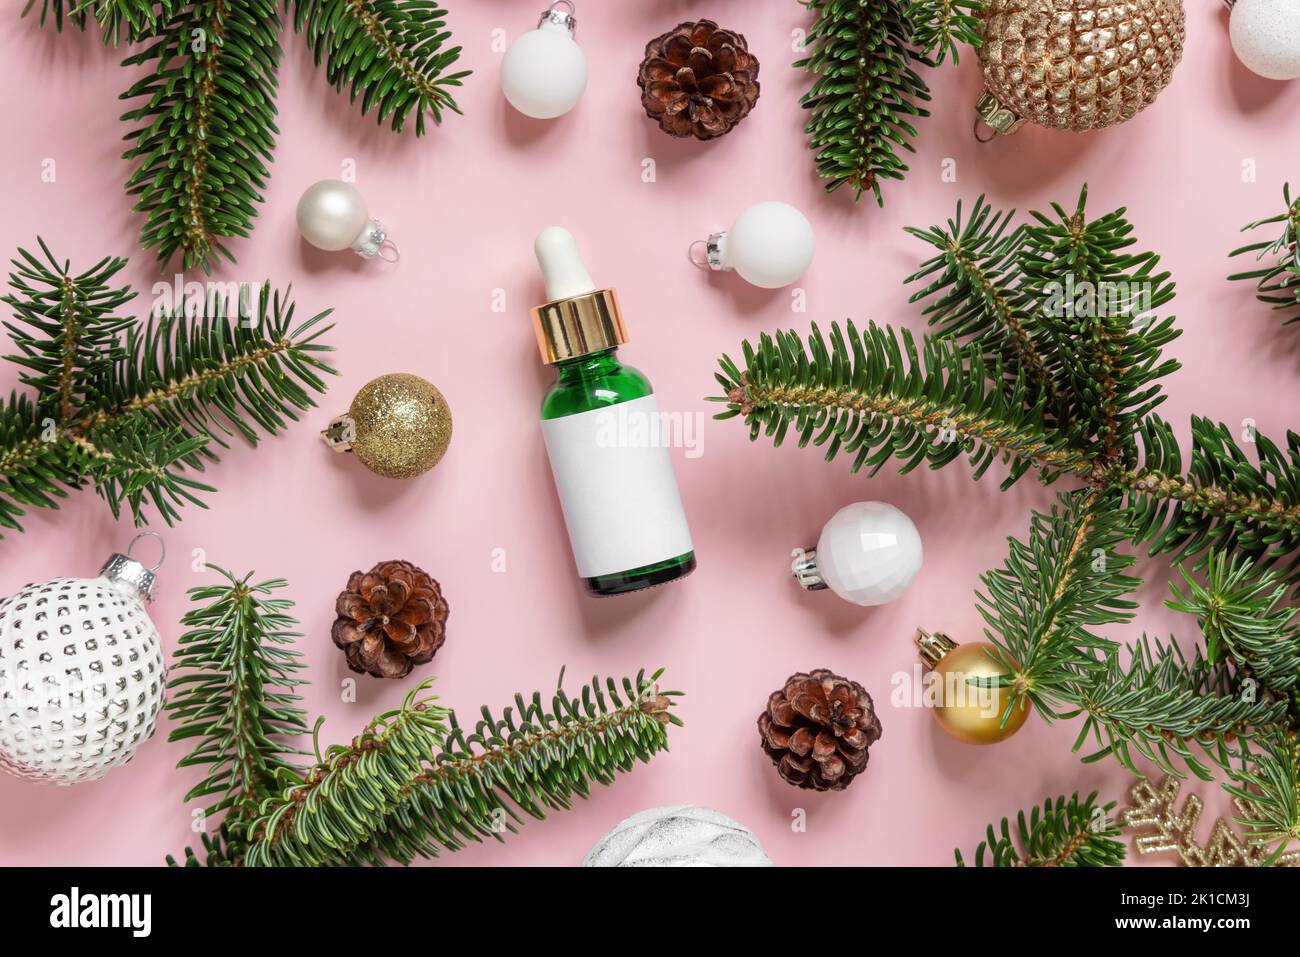 Green Dropper Bottle near Christmas decorations, fir branches and pine cones on pink top view. Holiday brand packaging mockup. Skincare beauty product Stock Photo